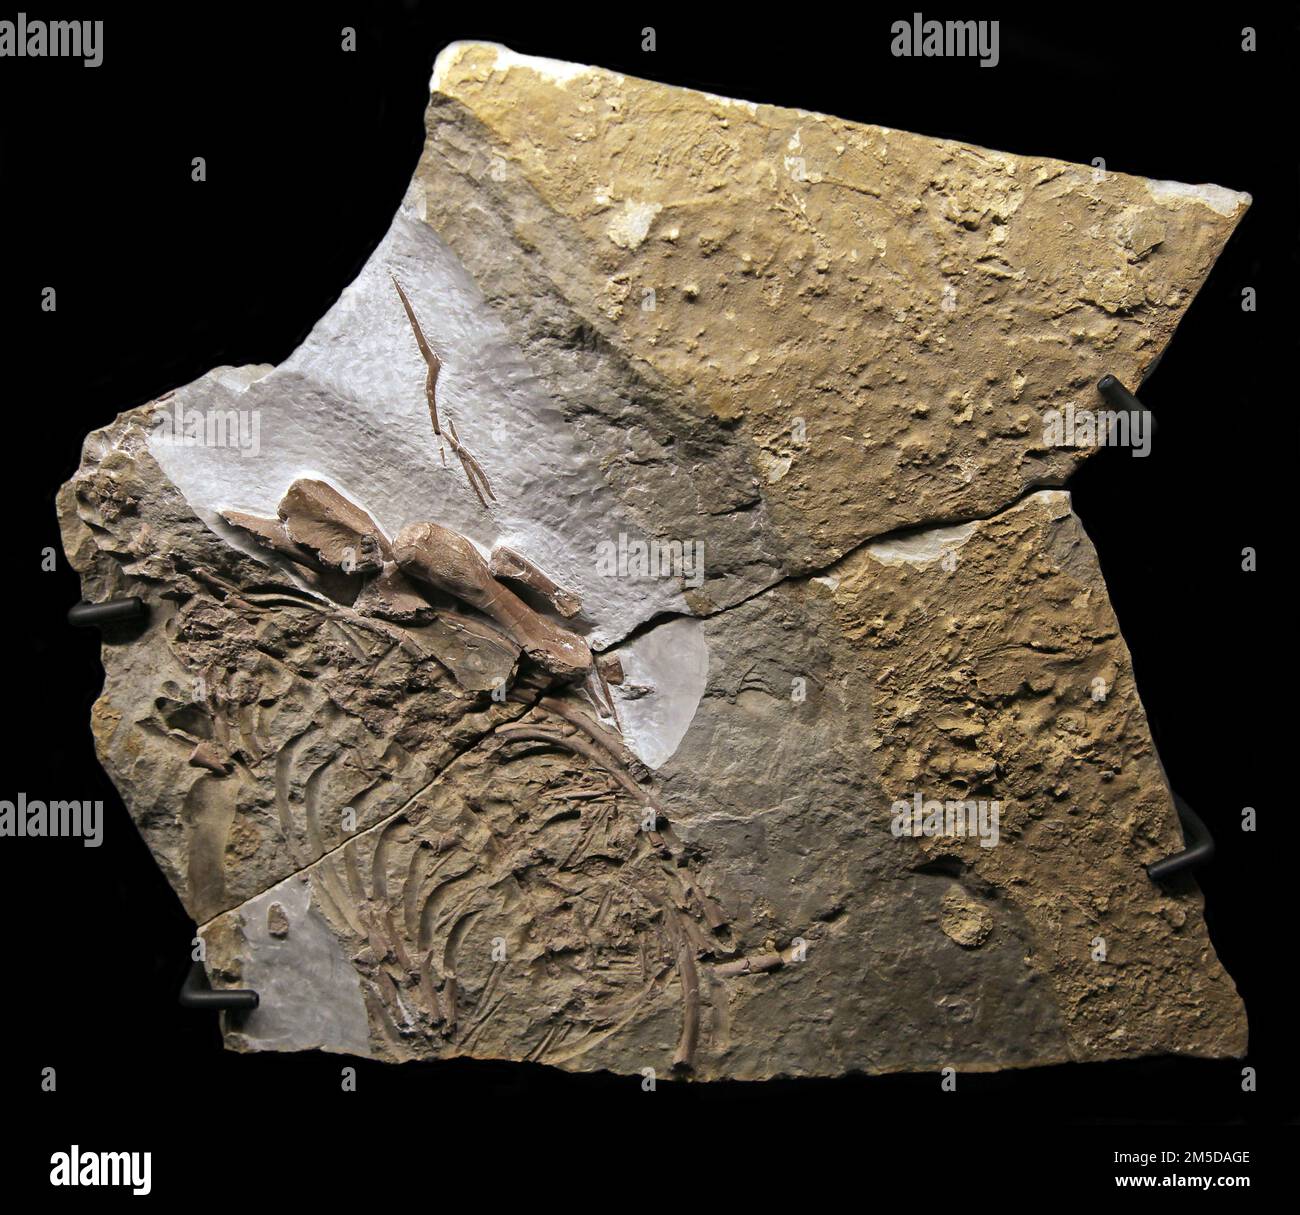 cf.Cymatosaurus fossil.Extinct genus pistosauroid, nothosauriform sauropterygian.Alive Early Triassic-Middle Triassic period the Netherlands. Stock Photo